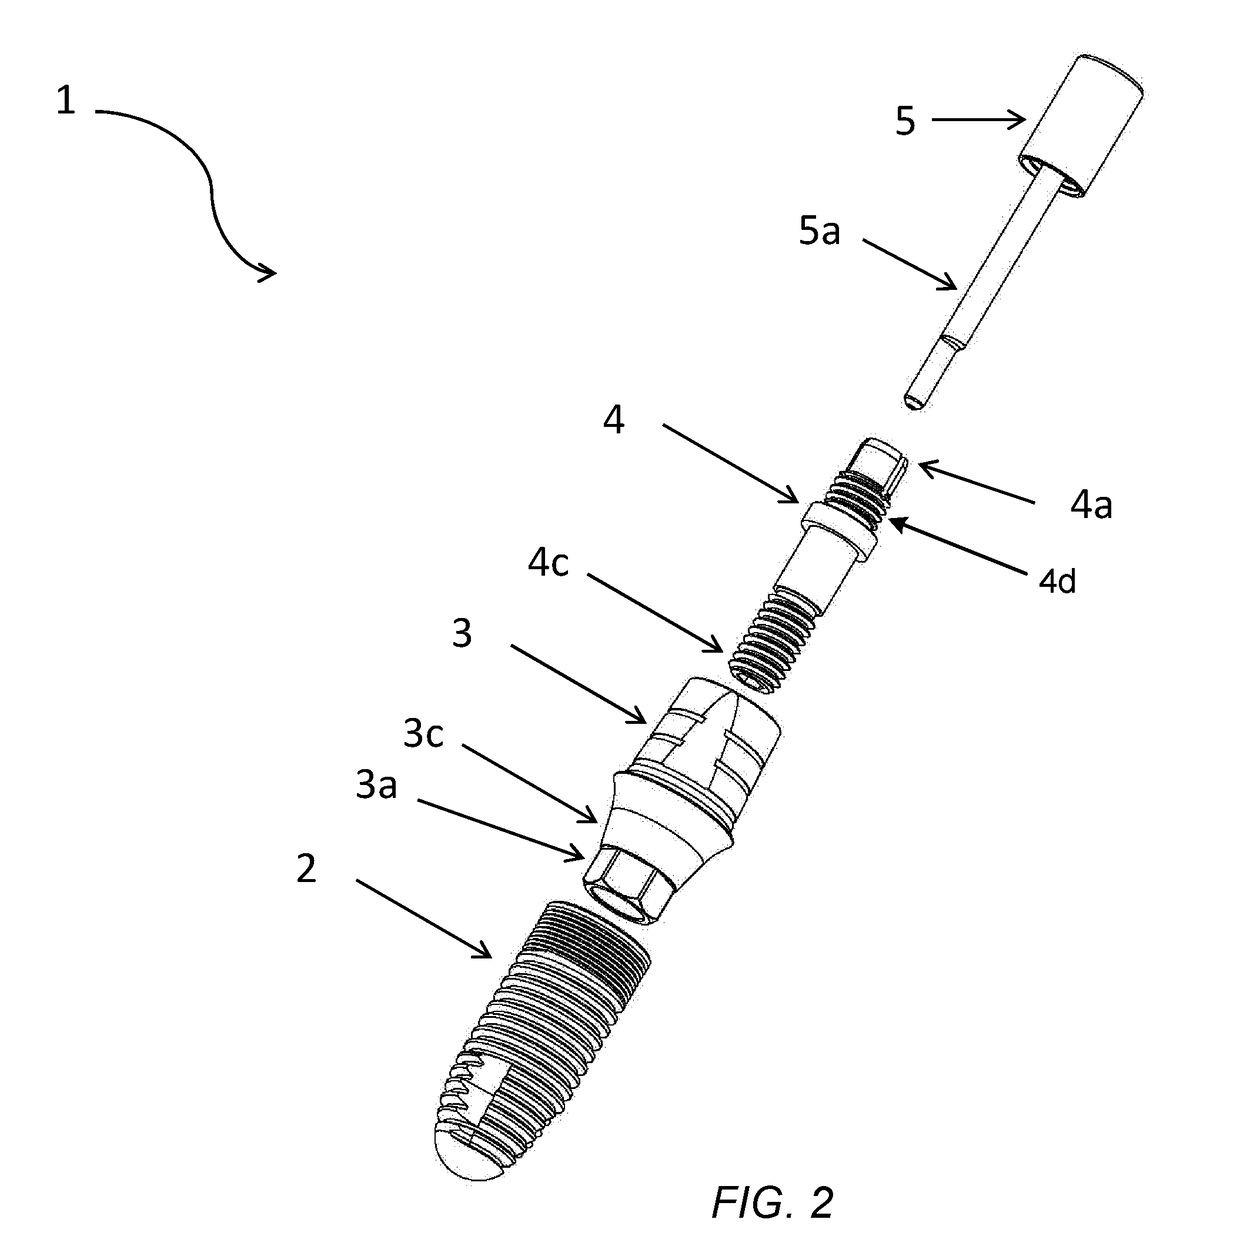 Dental implant system with positive abutment screw locking and retrieval mechanism